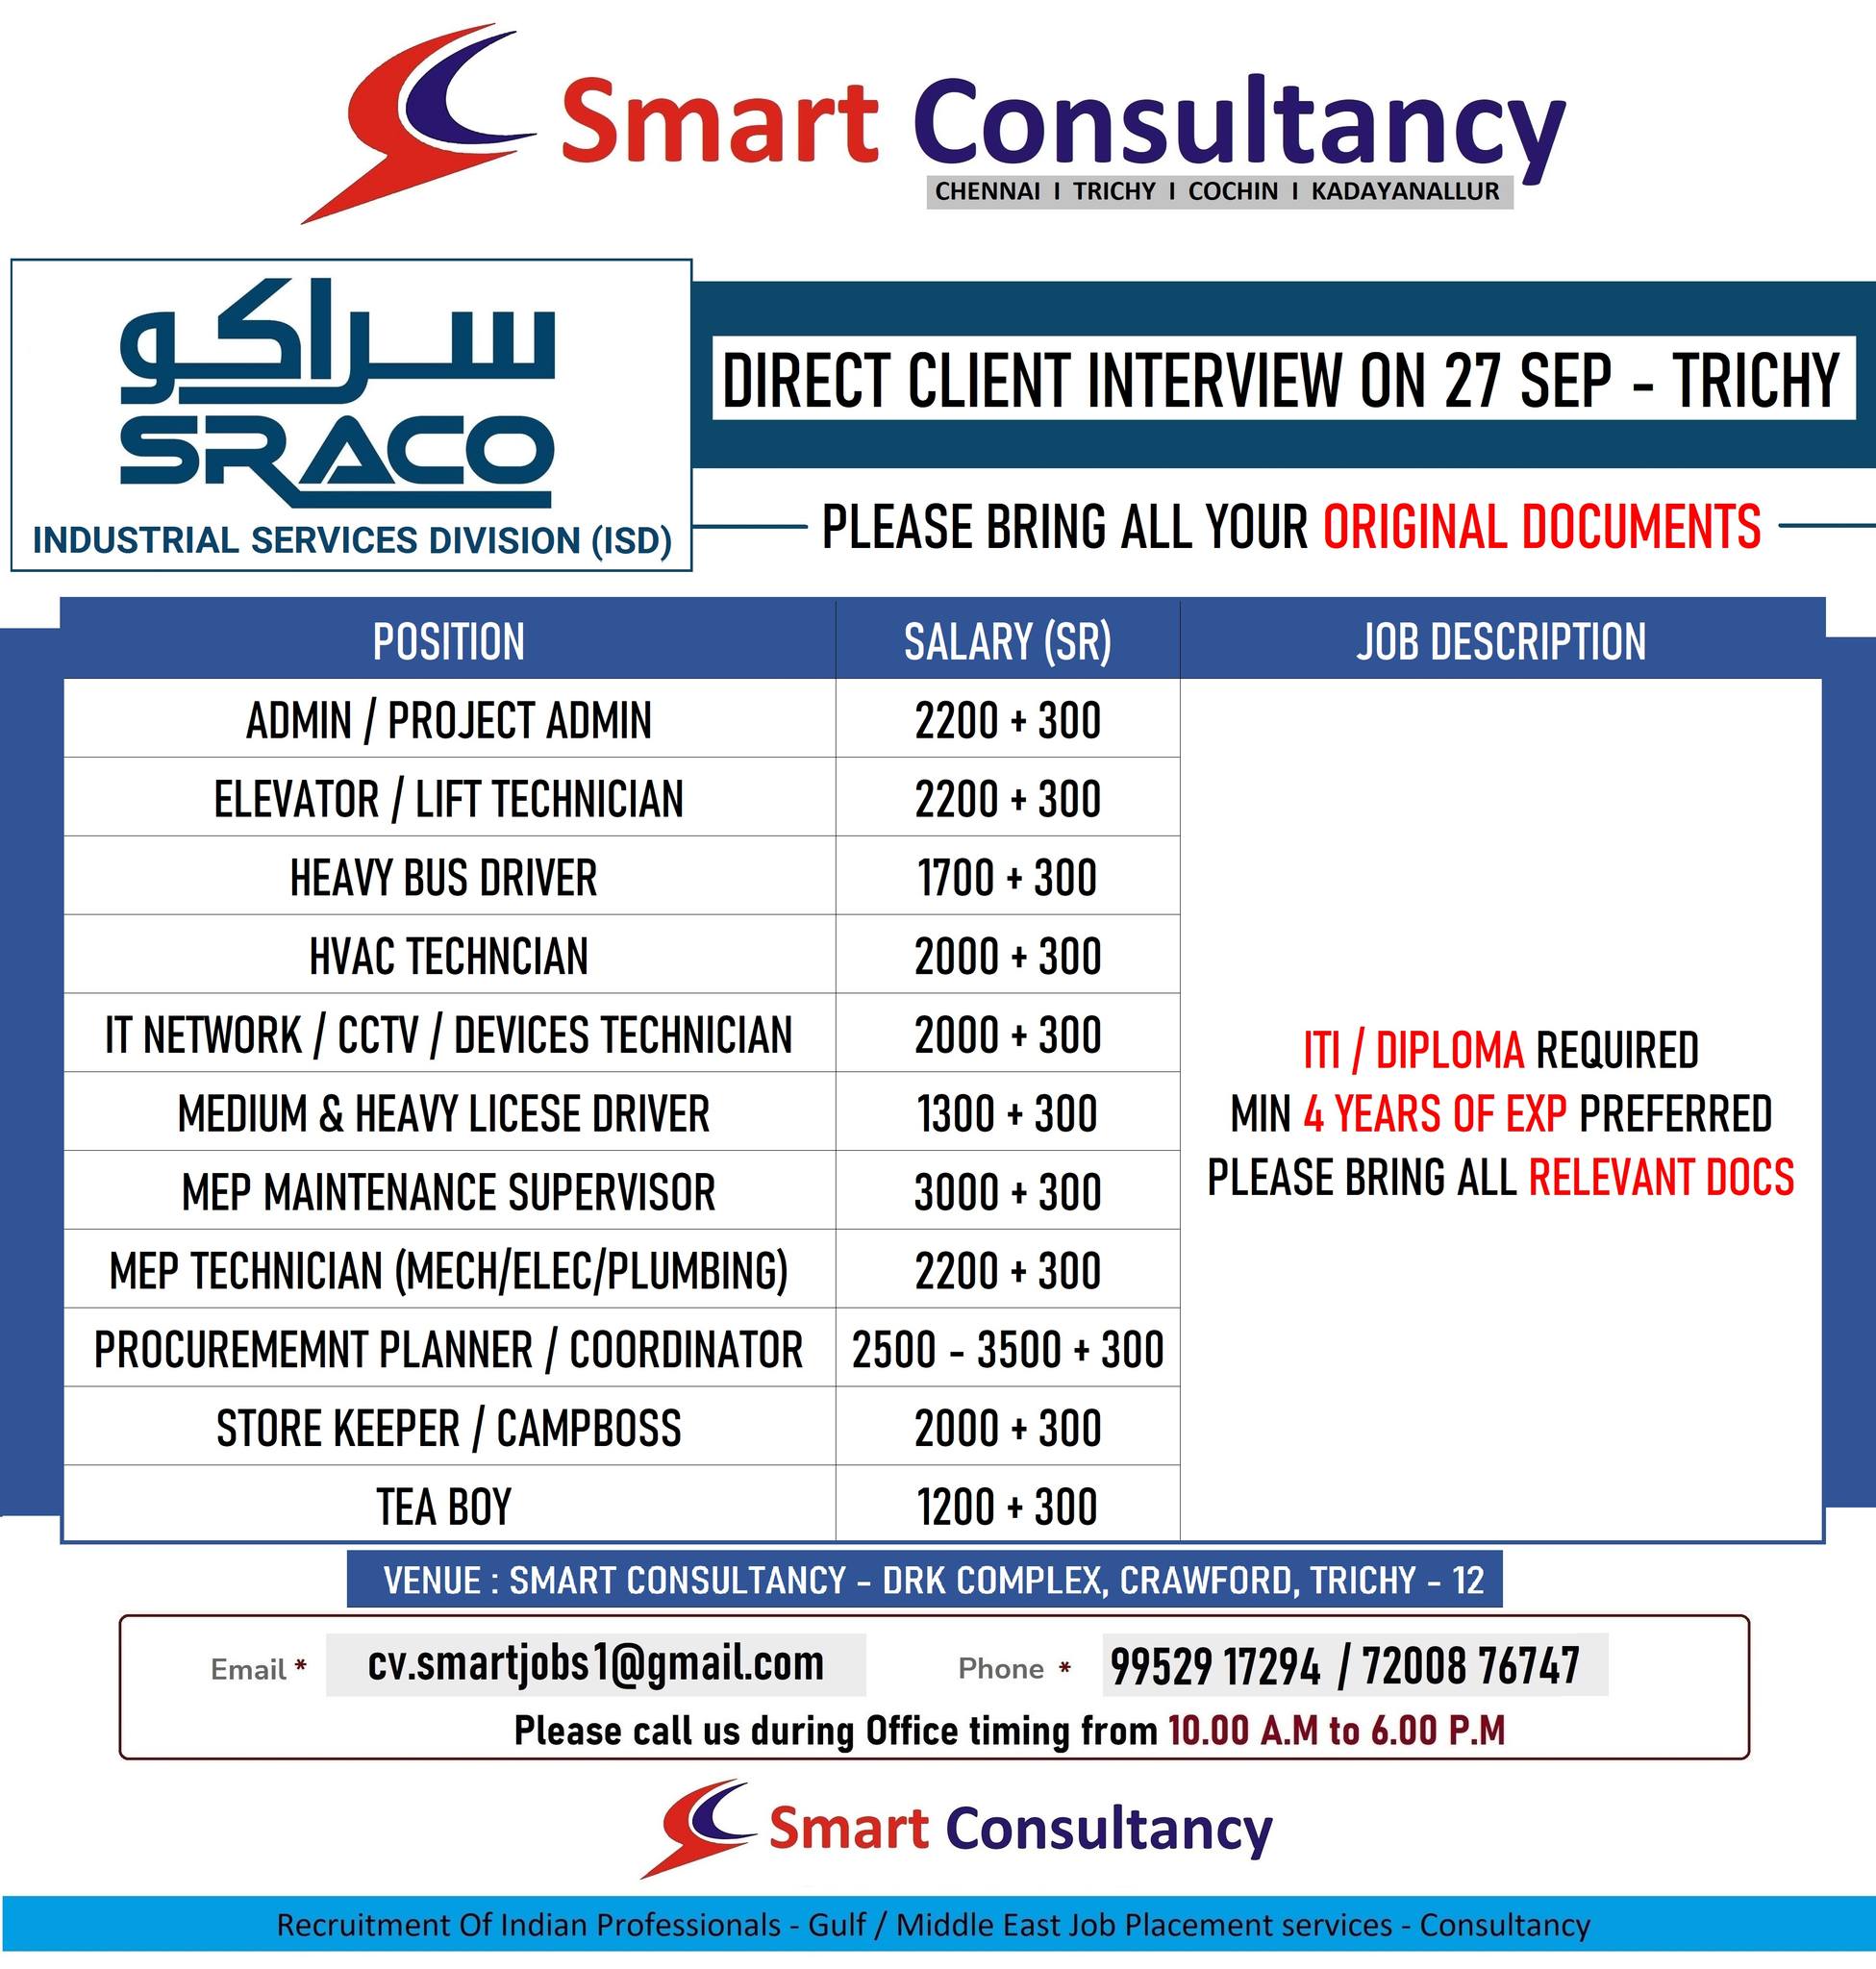 SRACO (SAUDI) - DIRECT CLIENT INTERVIEW ON 27 SEP - TRICHY